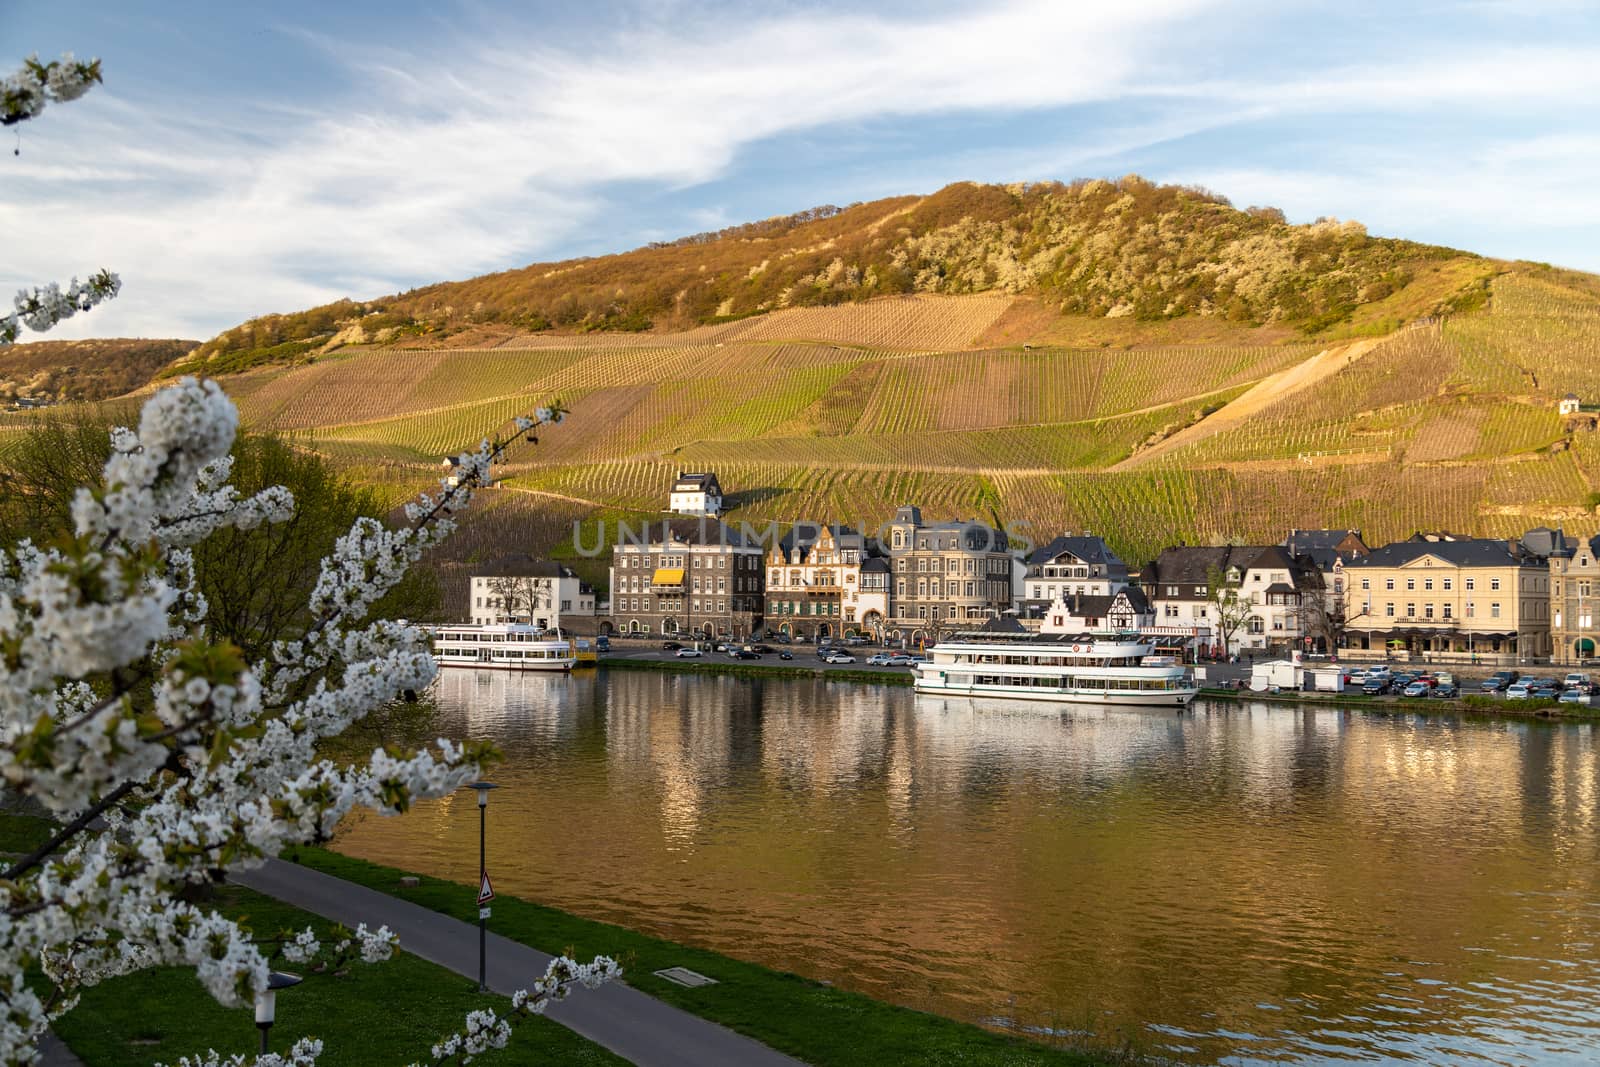 Bernkastel-Kues at river Moselle, Germany by reinerc